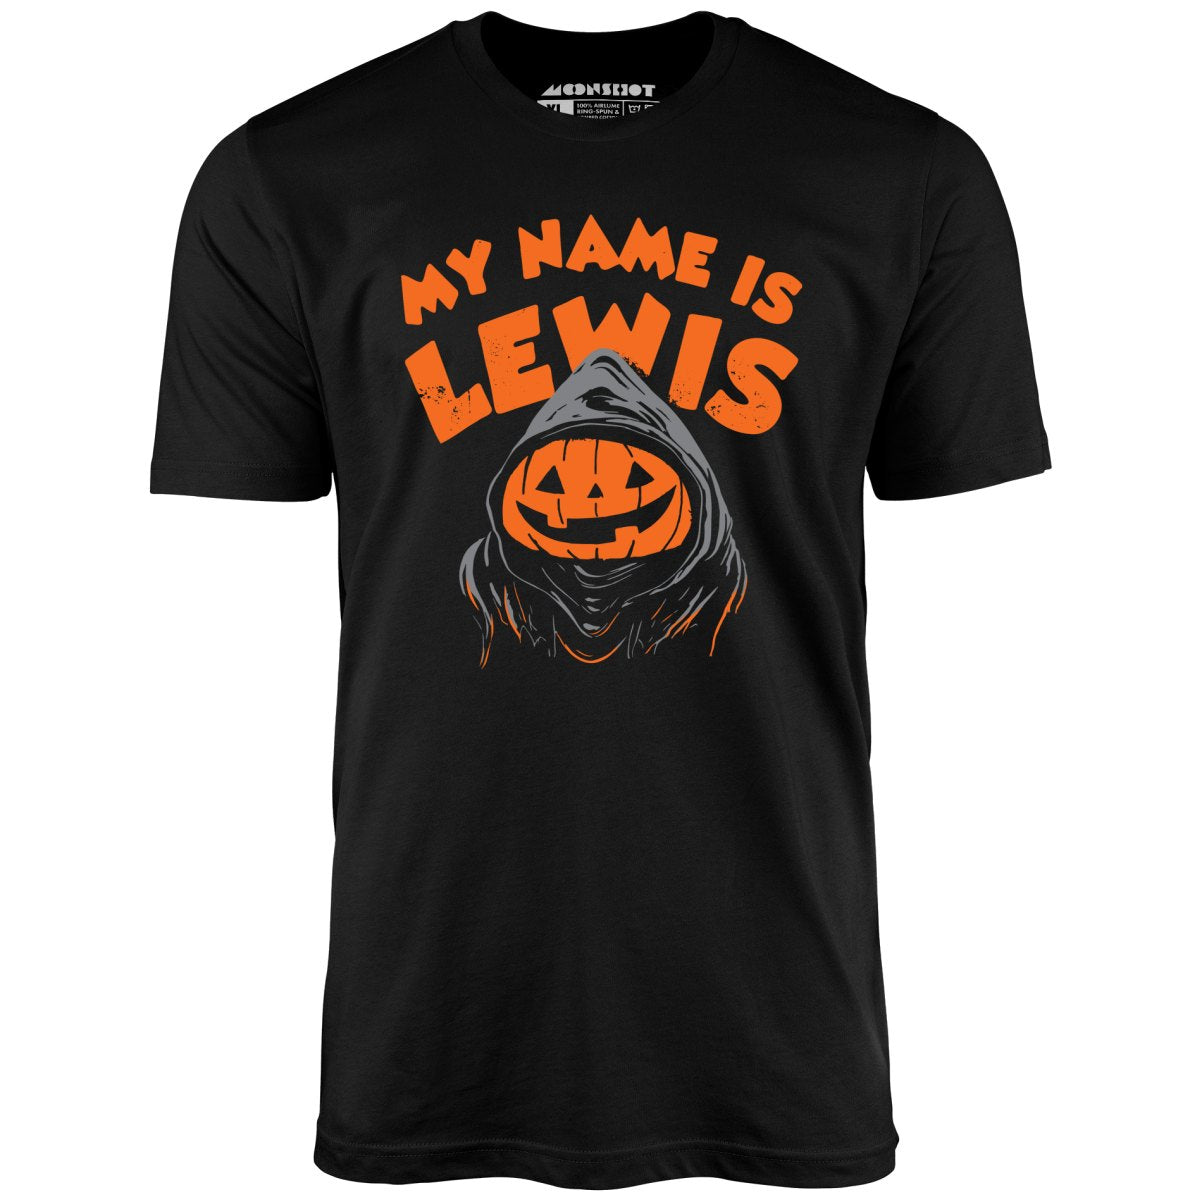 My Name is Lewis - Unisex T-Shirt